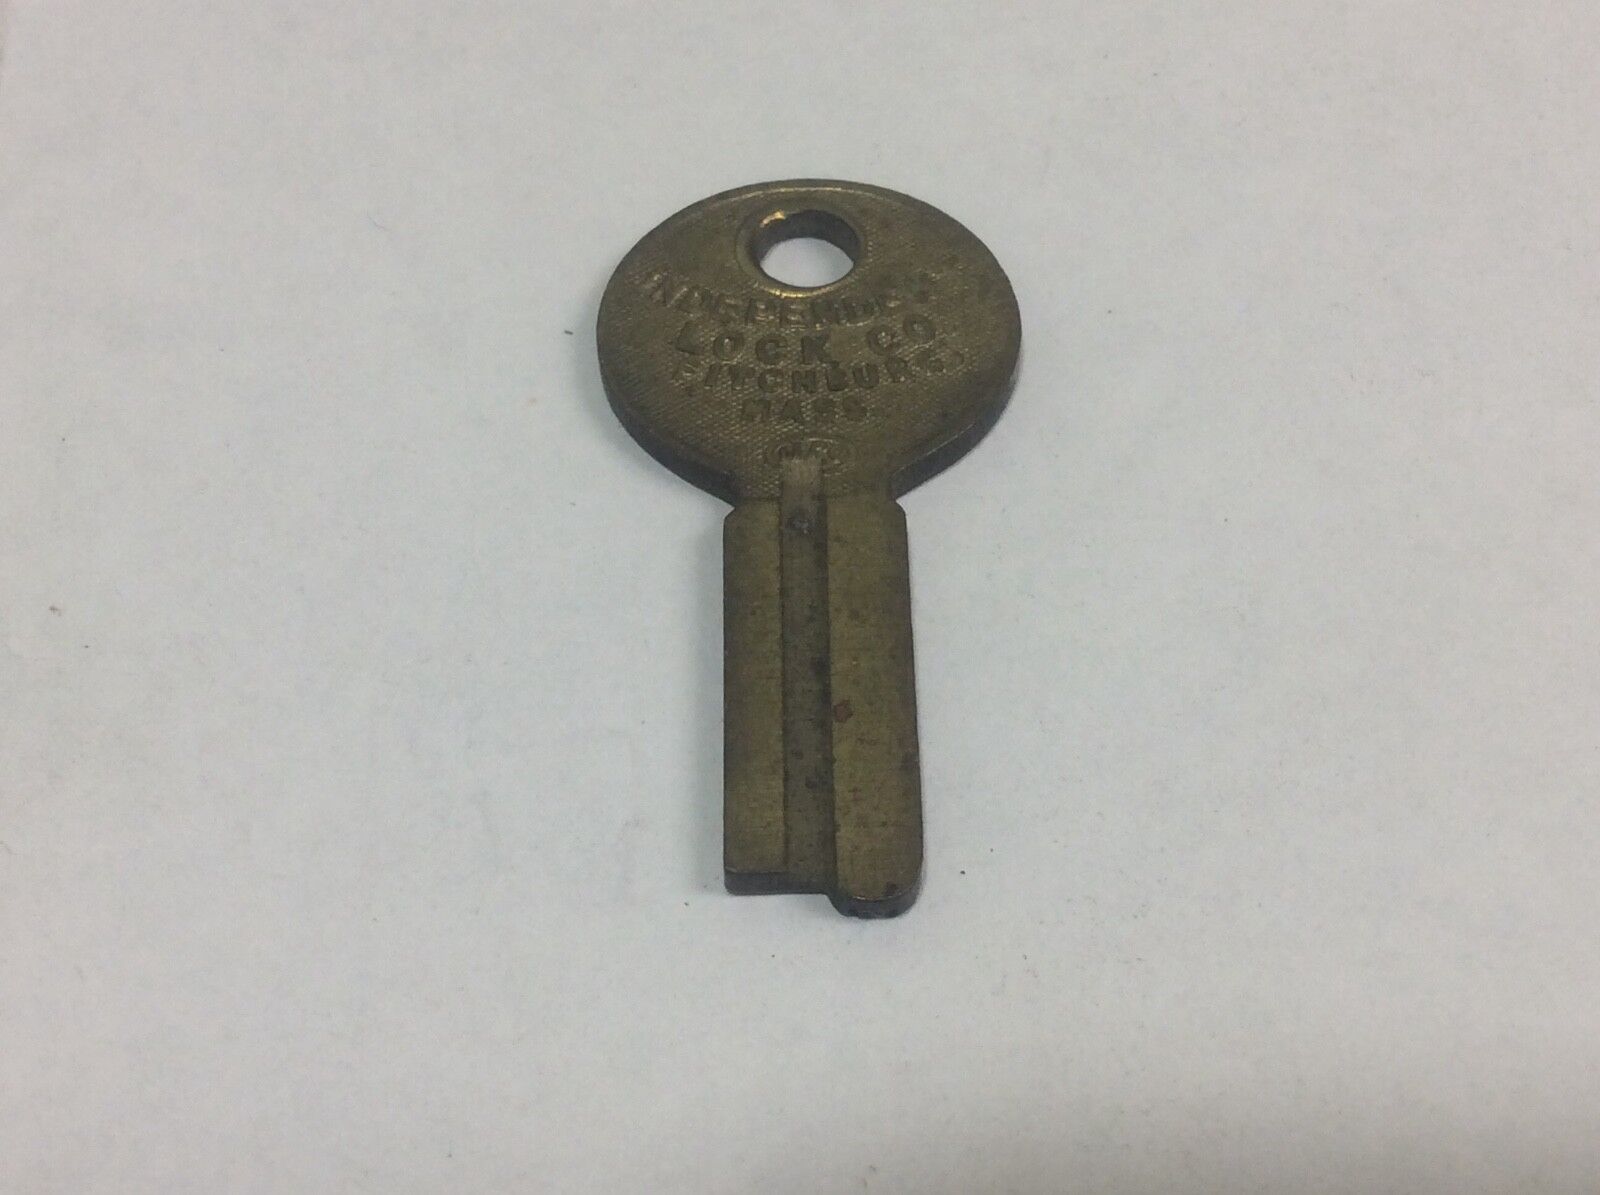 Independent lock co brand Surprise price key blank; # Fixed price for sale presto 1128 lo luggage;